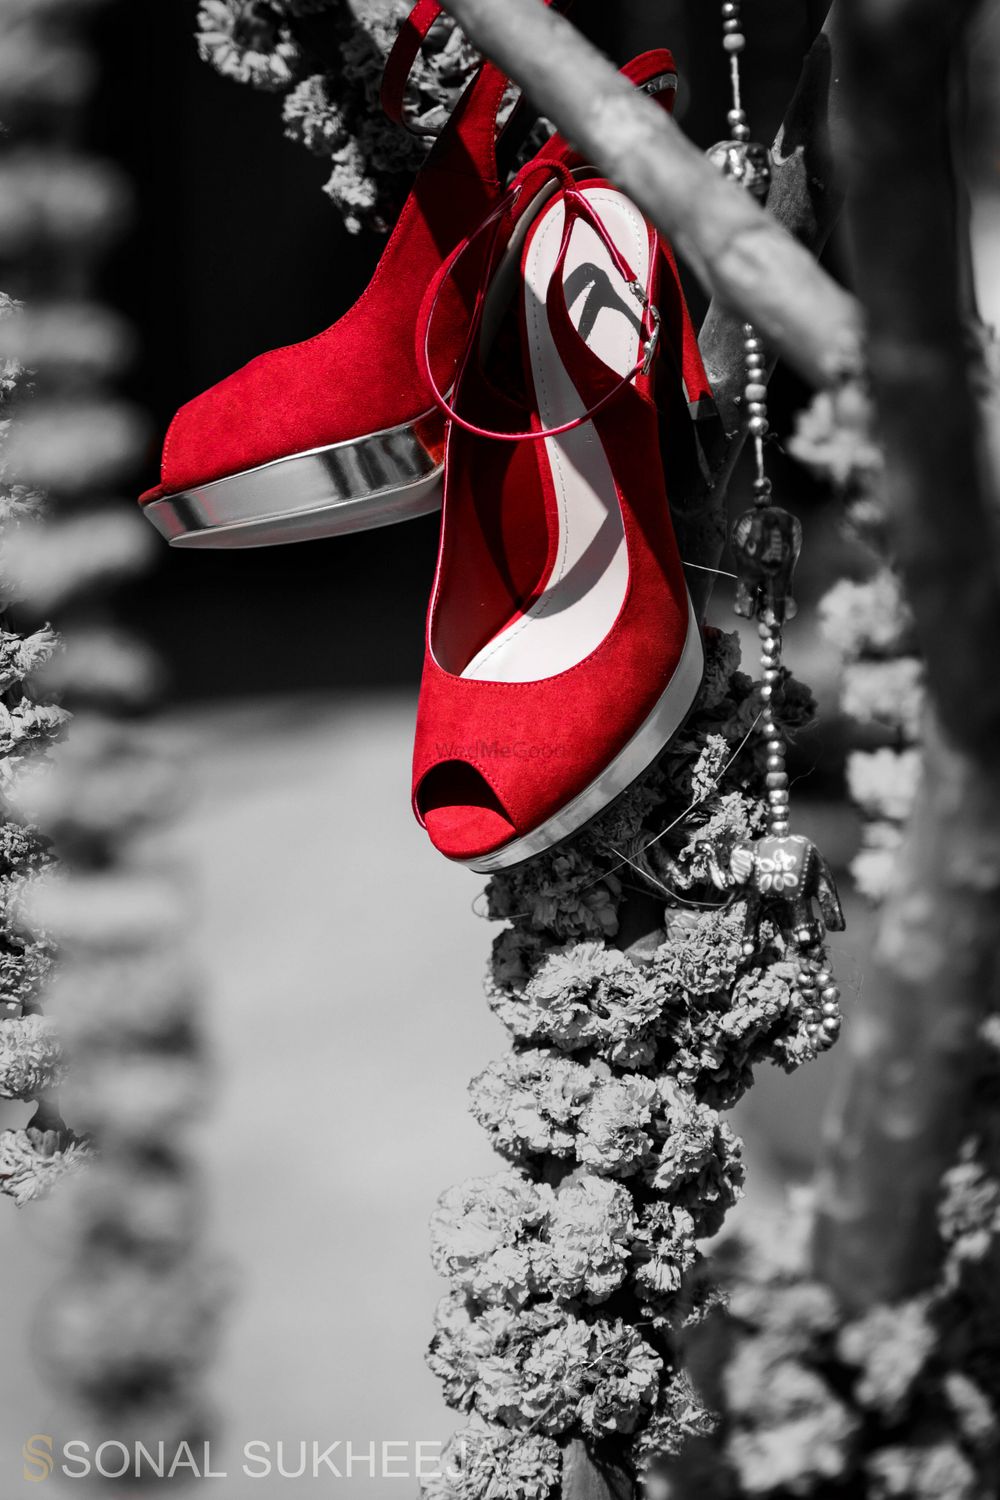 Photo From Details - Rings, Shoes, Dress, Decor etc - By Sonal Sukheeja Photography